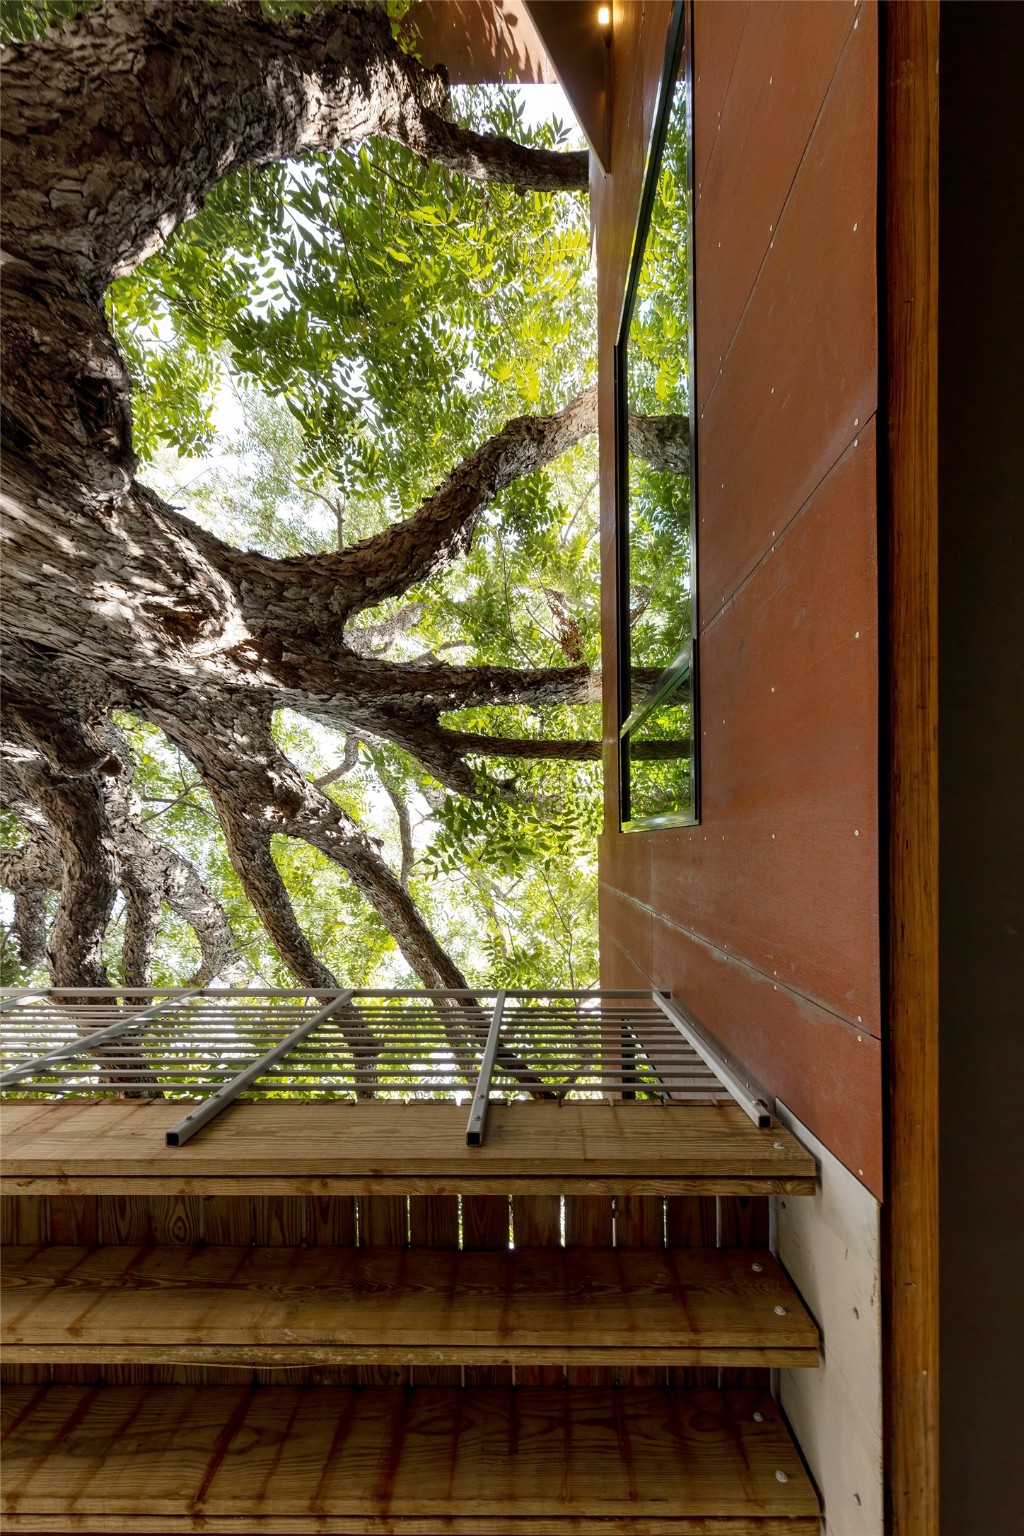 Before climbing the stairs, a quick look up at the pecan tree provides an incredible perspective.